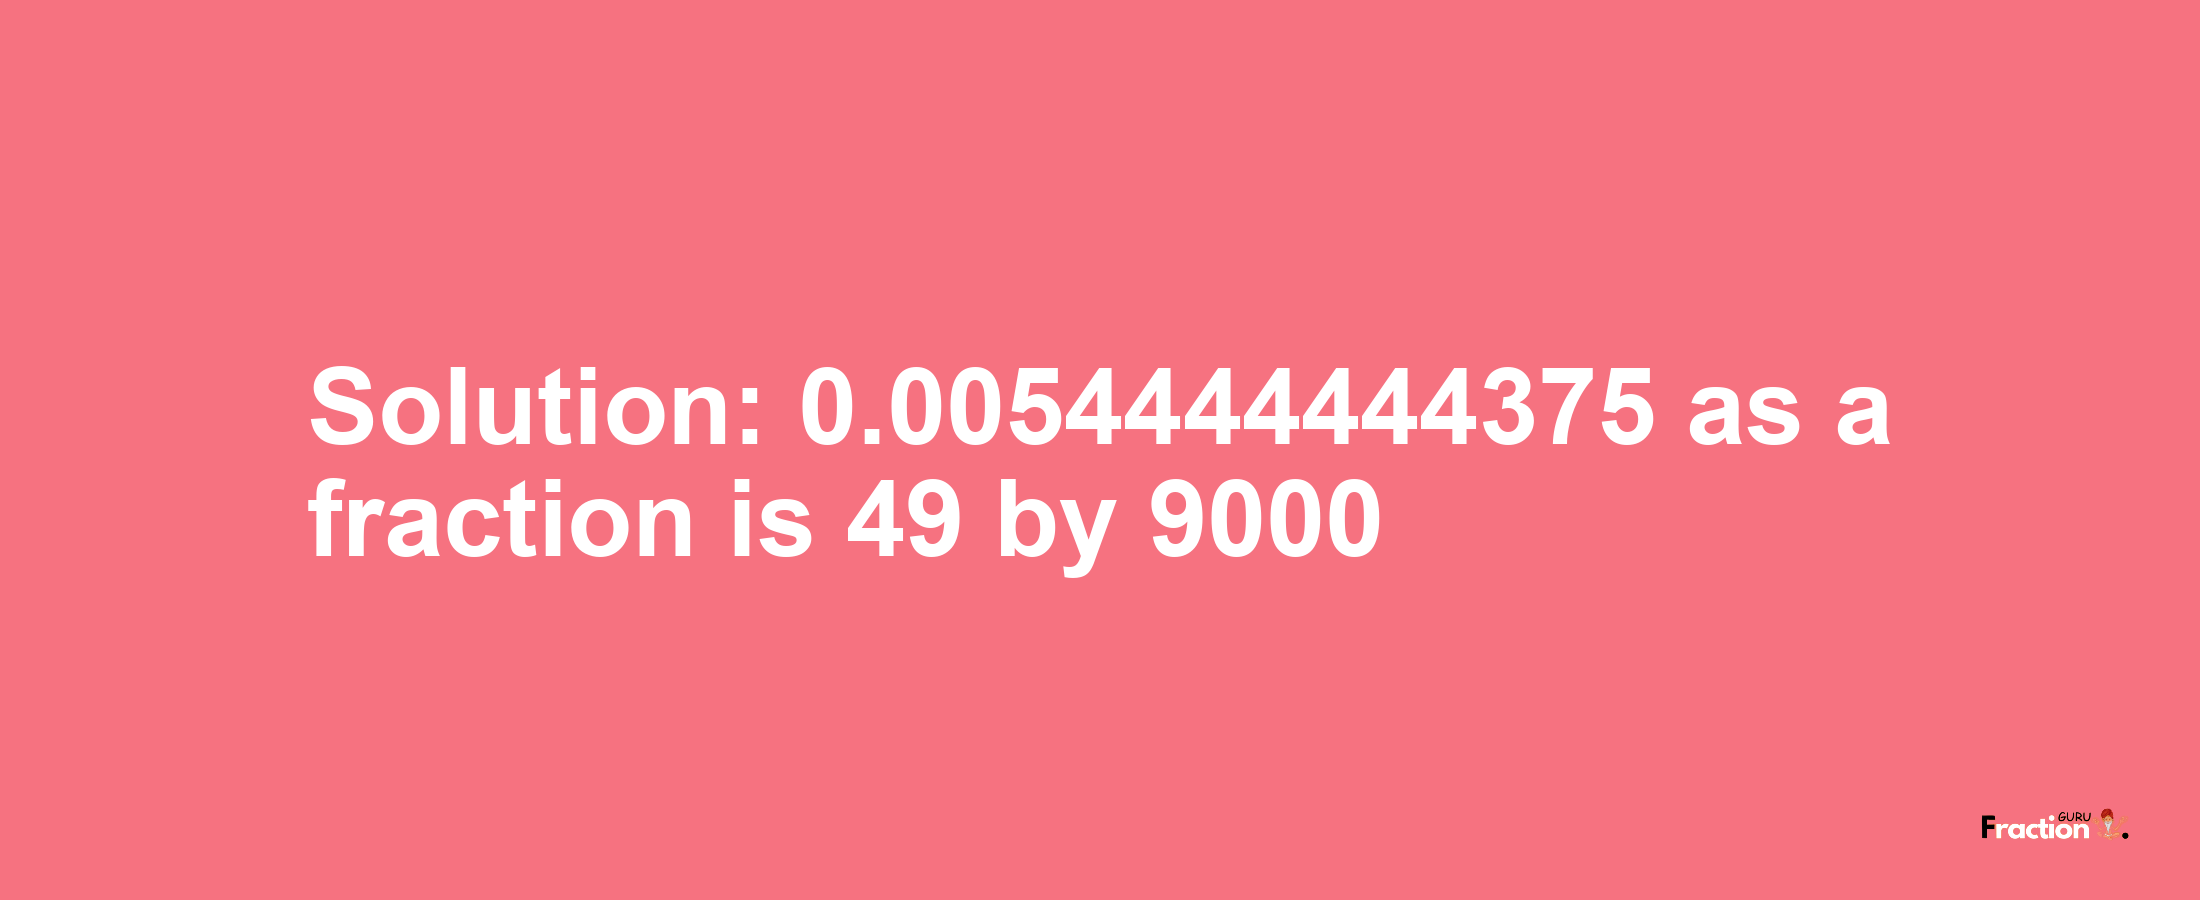 Solution:0.0054444444375 as a fraction is 49/9000